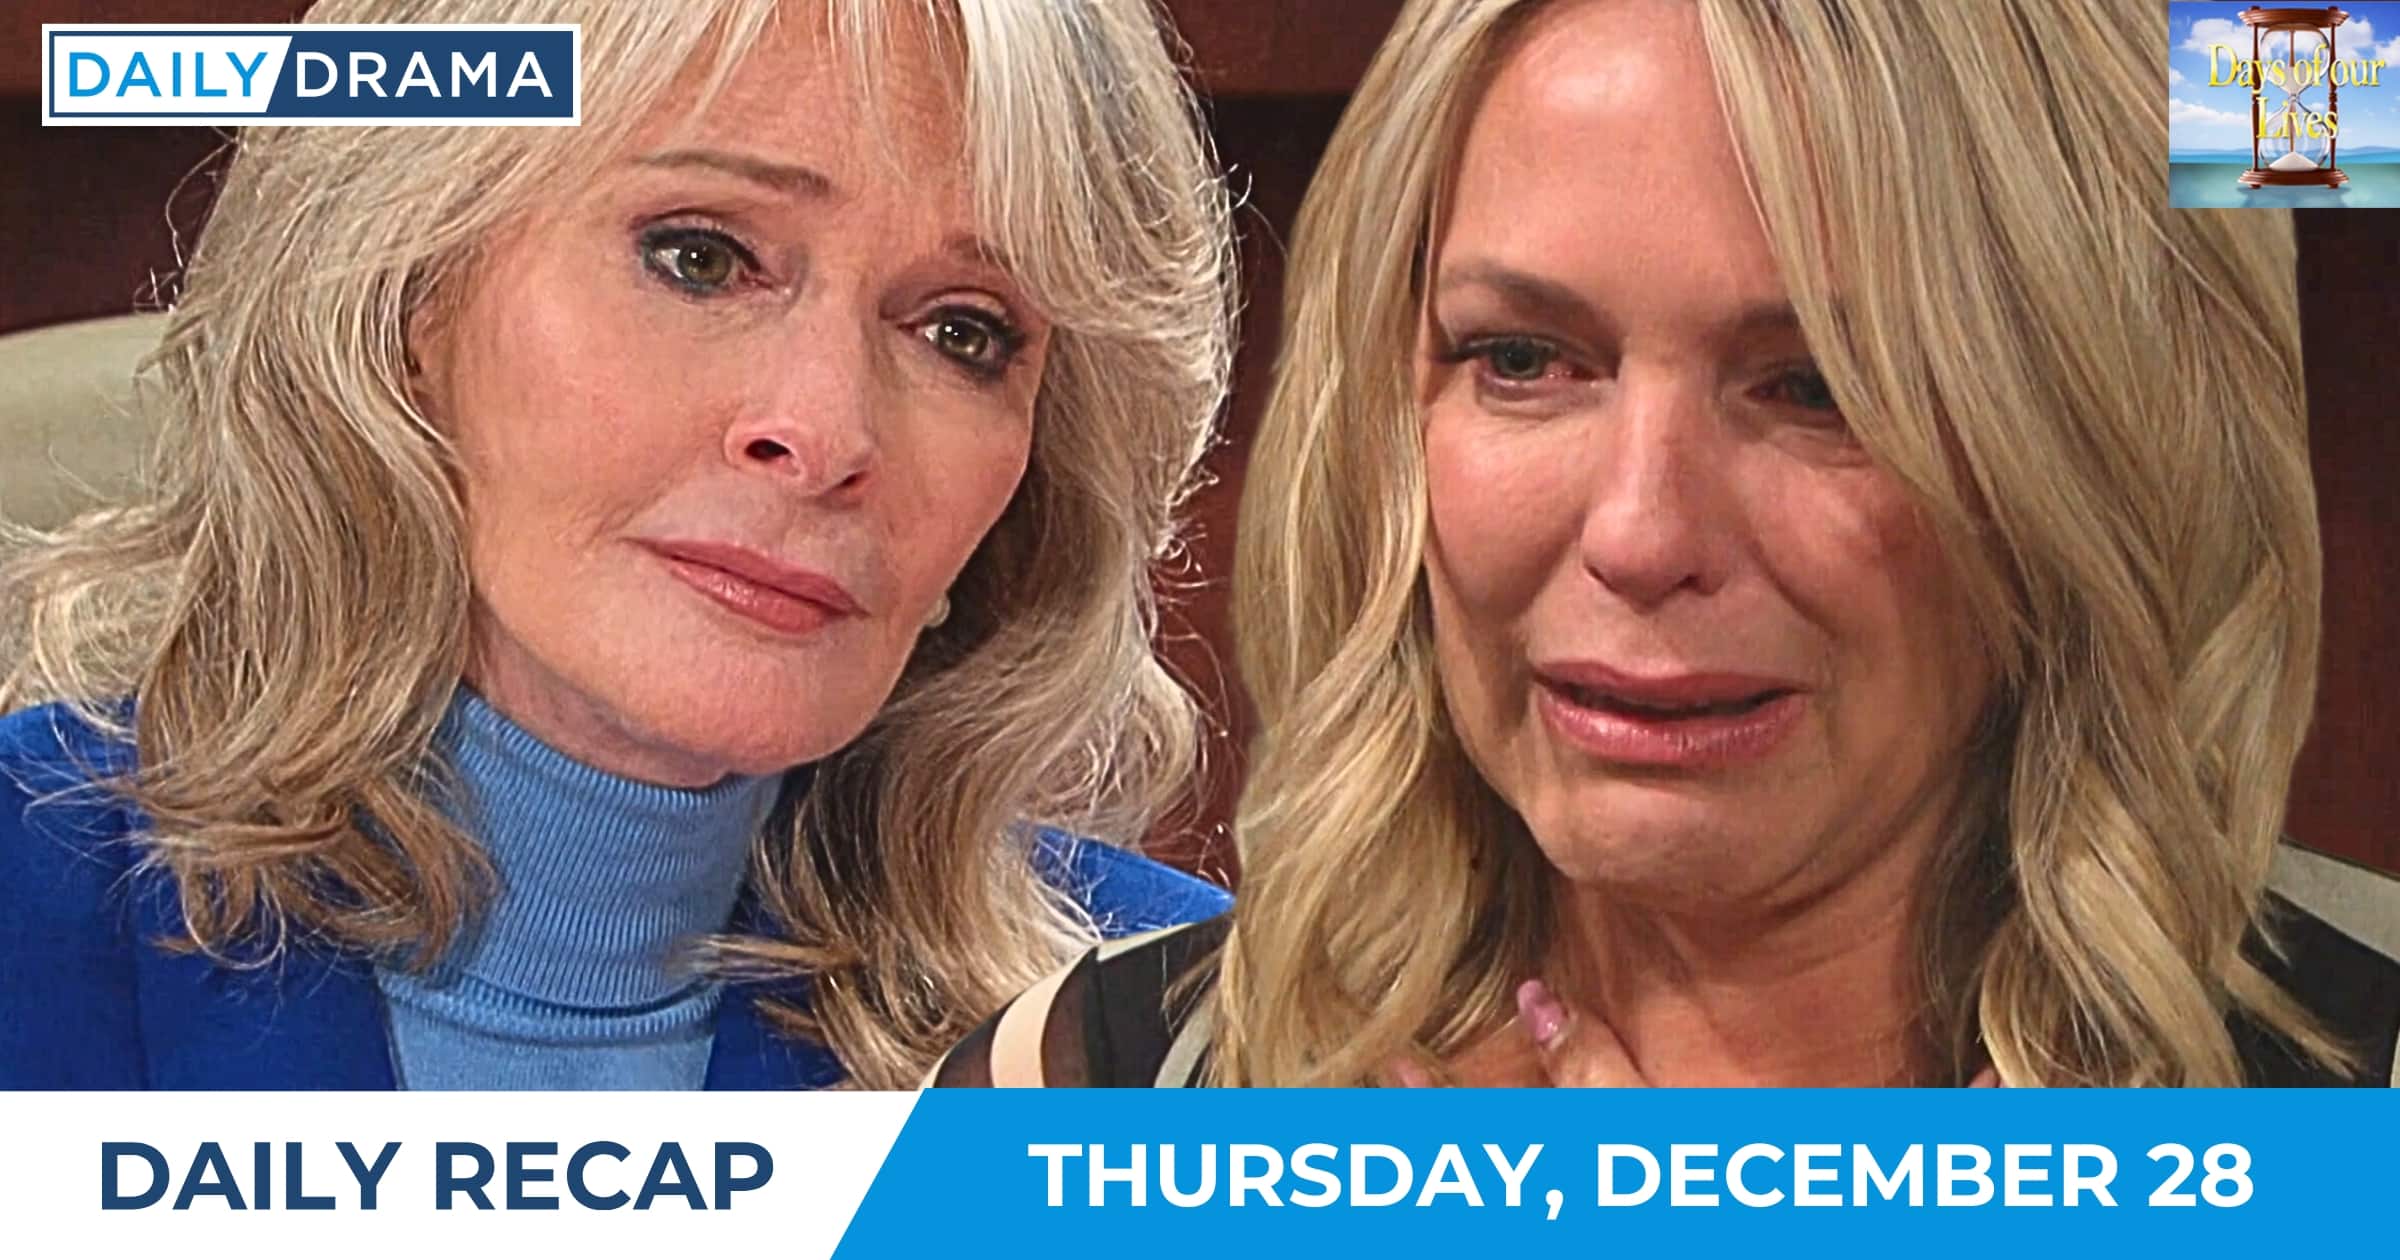 Days of Our Lives Daily Recap - Dec 28 - Marlena and Nicole